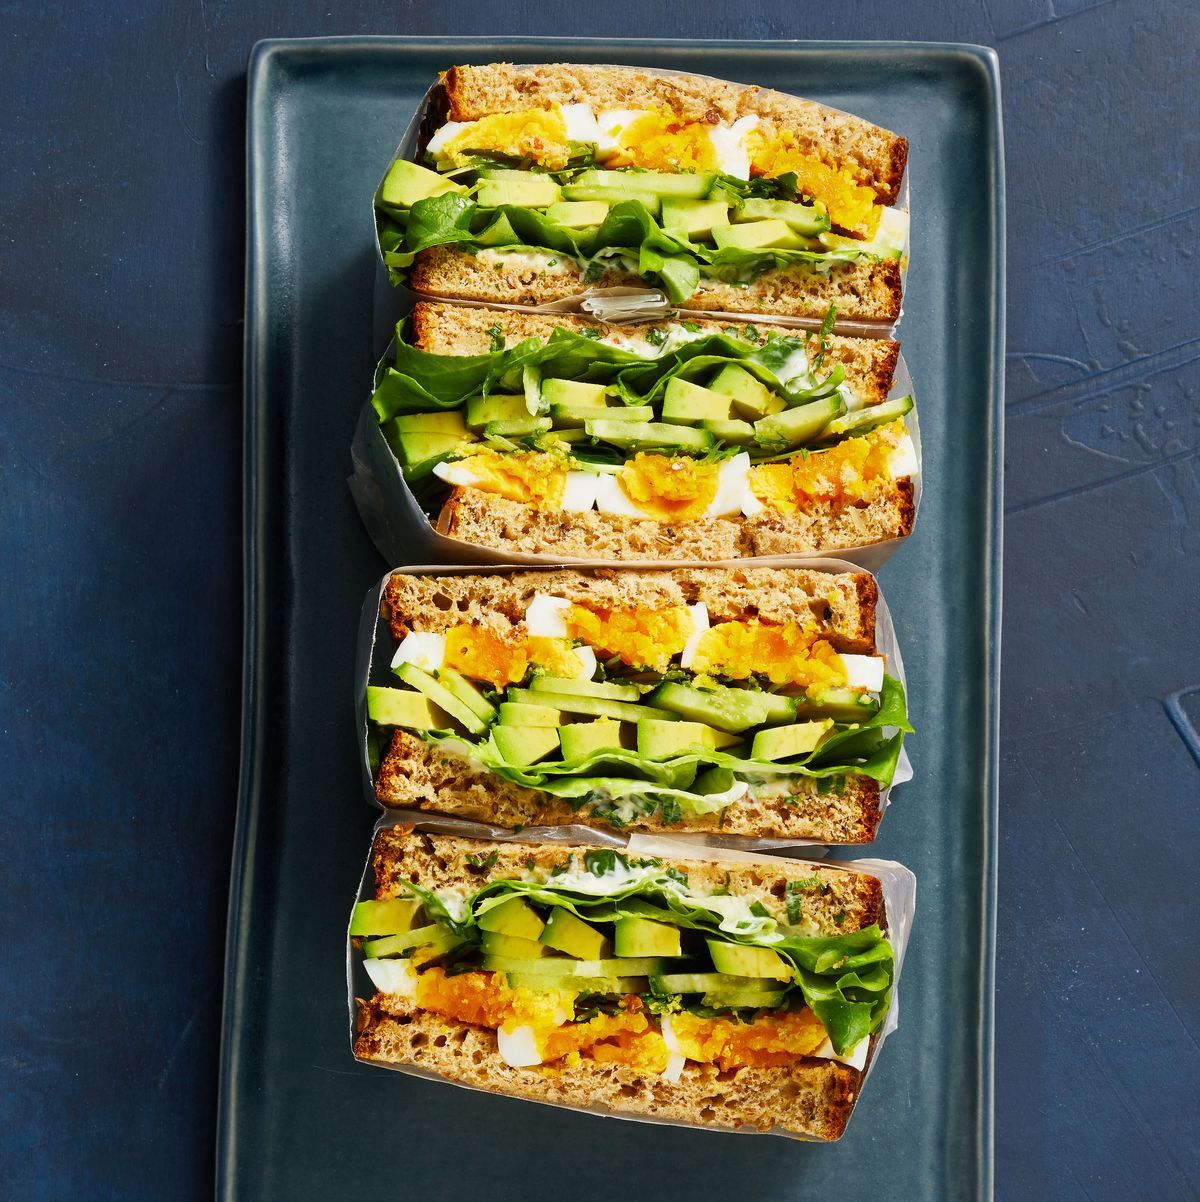 Here’s How to Make a Healthy and Seriously Filling Sandwich - Decors ...